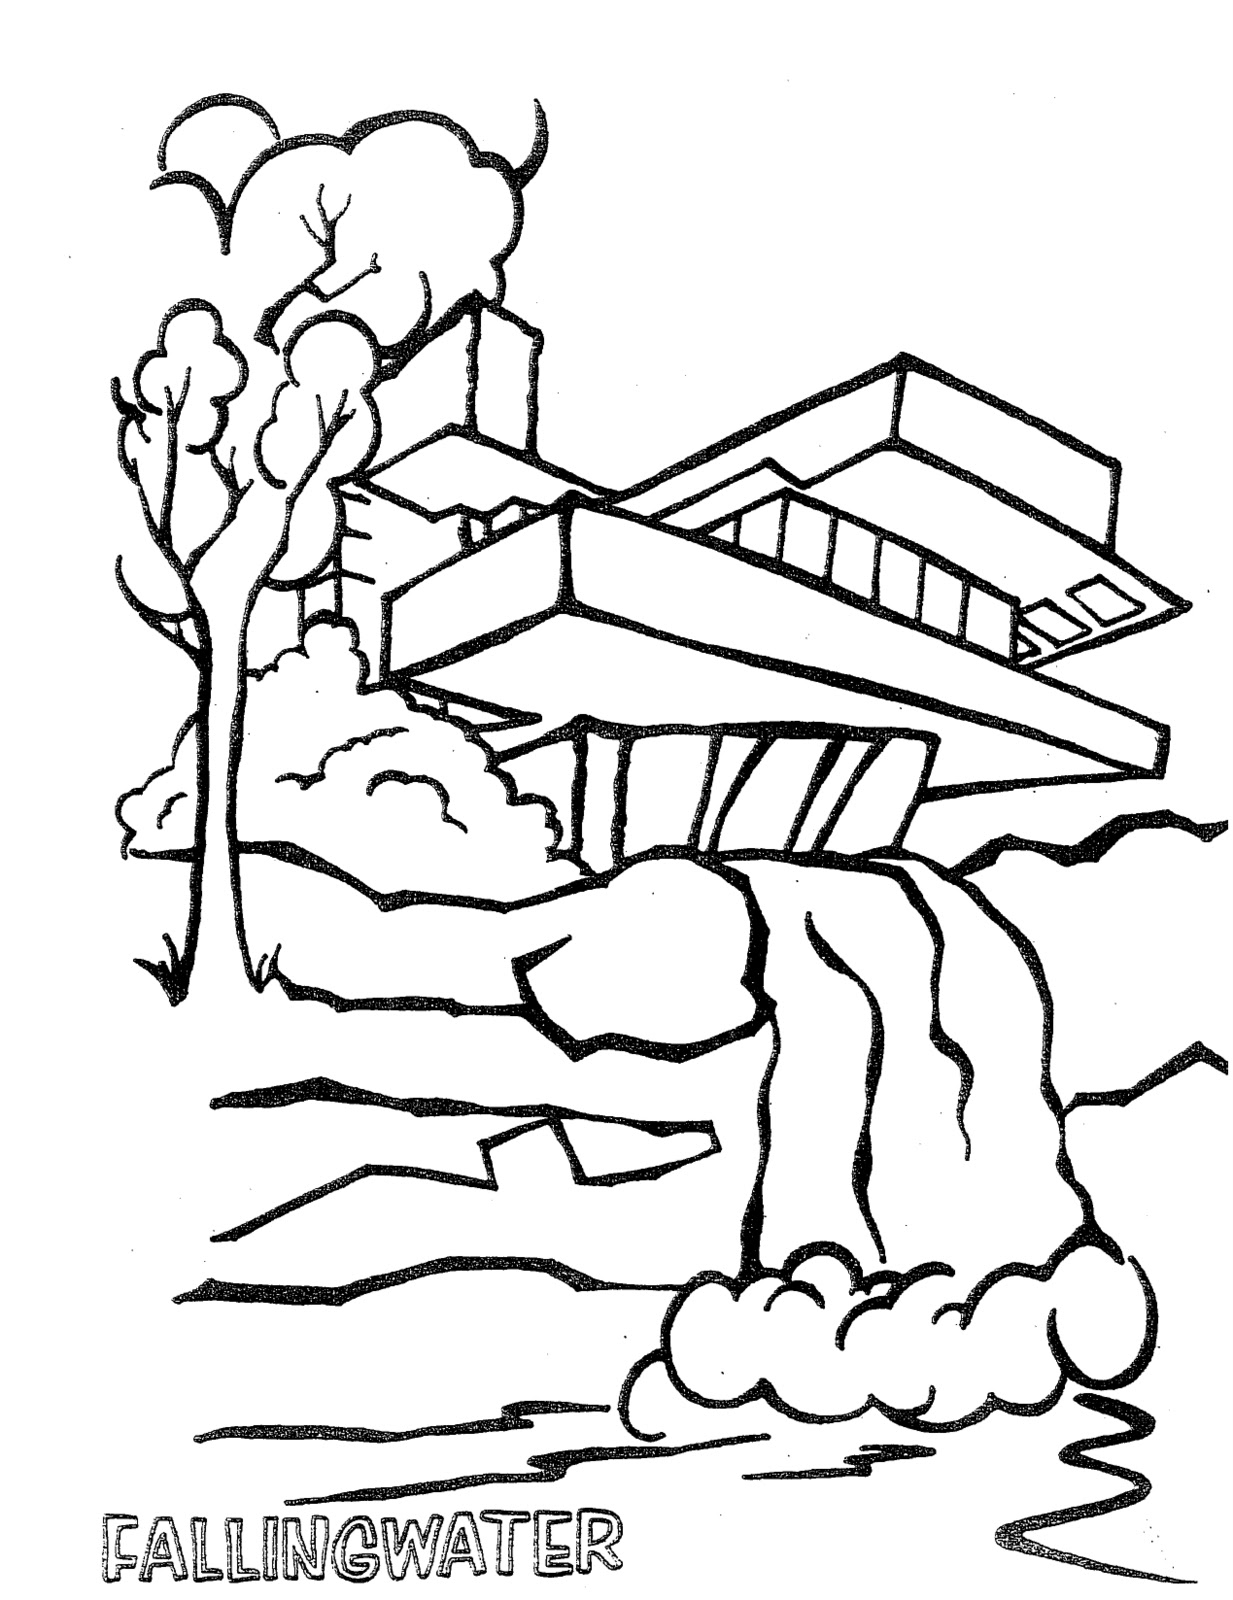 Waterfall #11 (Nature) – Printable coloring pages